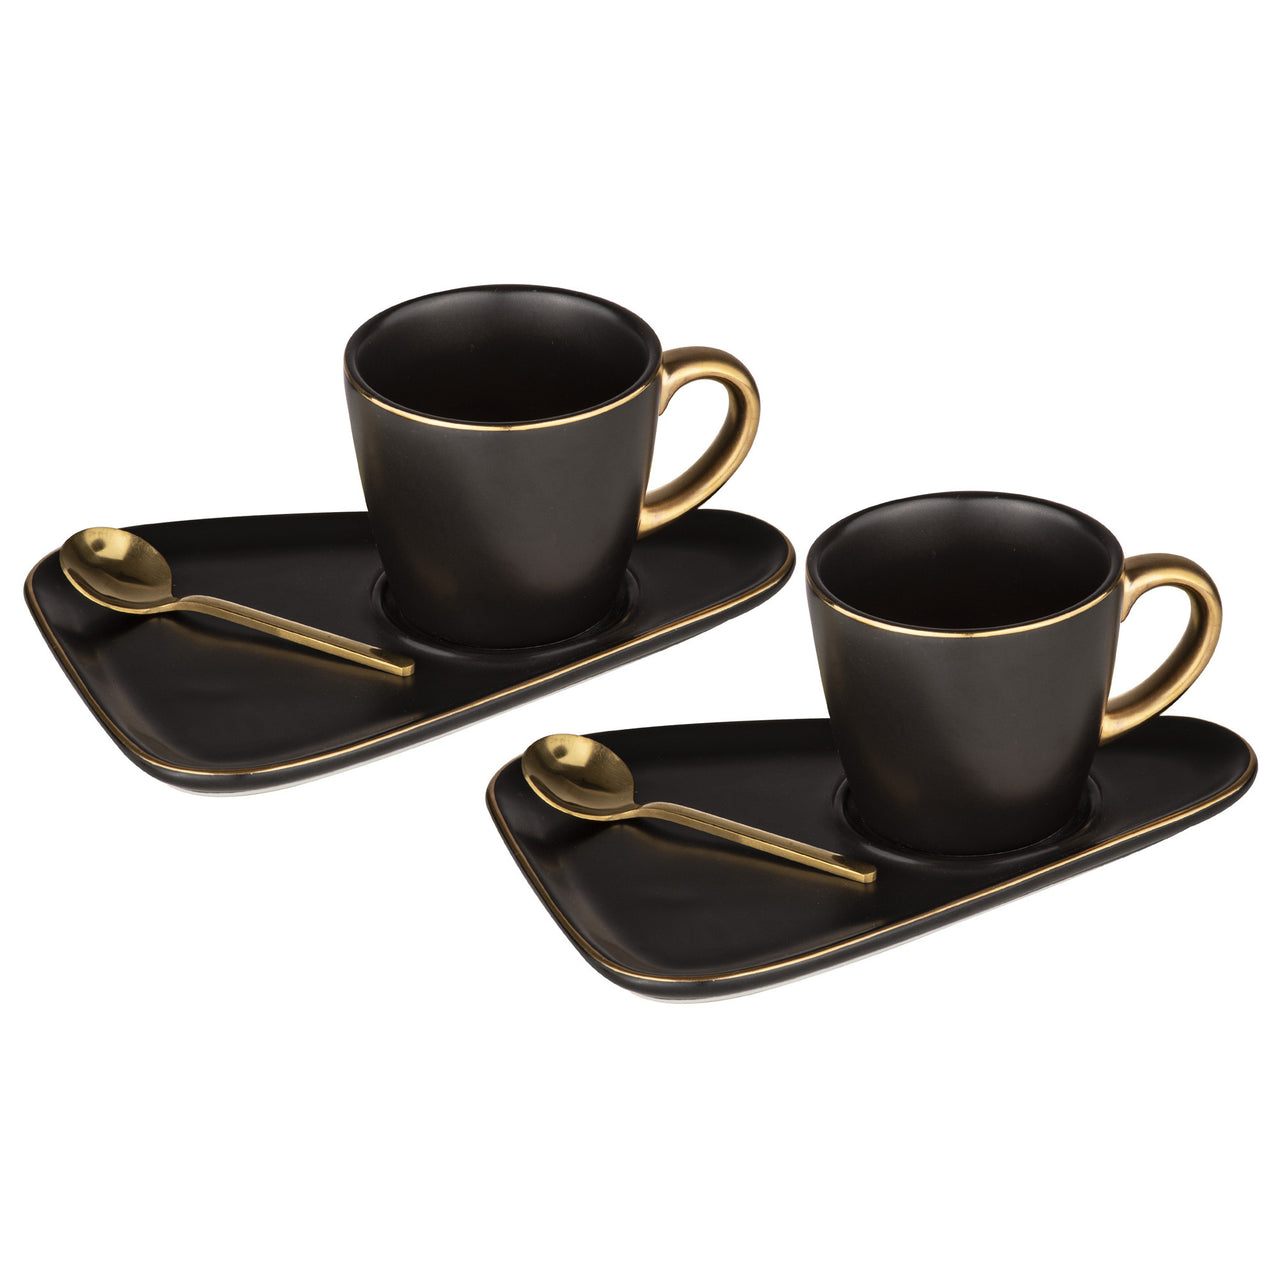 Black Asteria 80ml Espresso Cups & Saucers with Spoons (Set of 2)